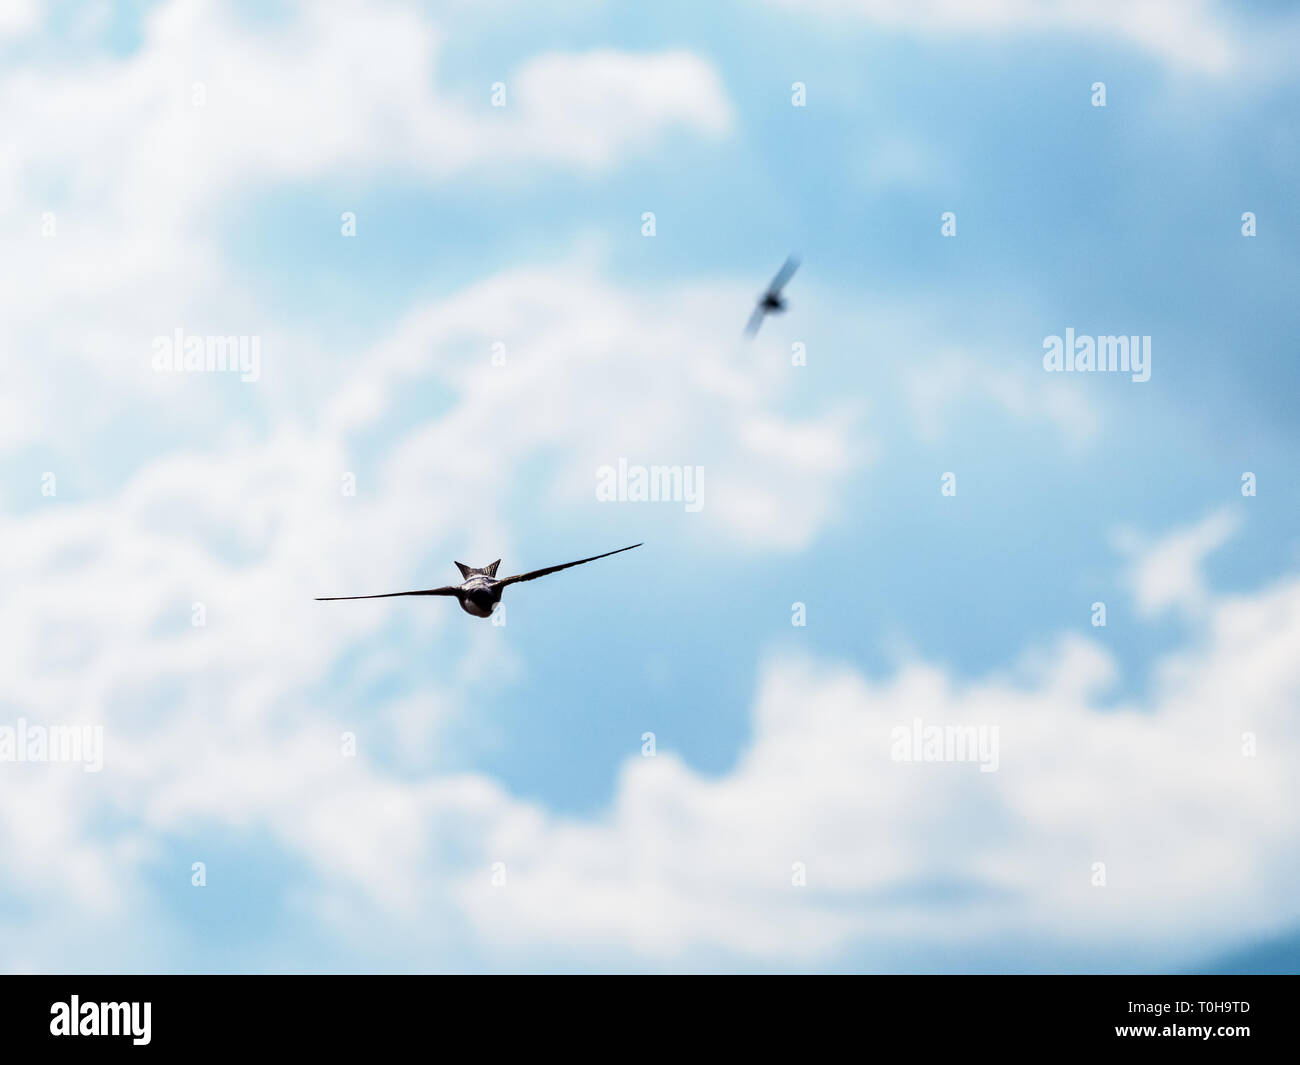 The swift flight of swallows in the blue cloudy sky. Fast birds in the summer sky. Stock Photo